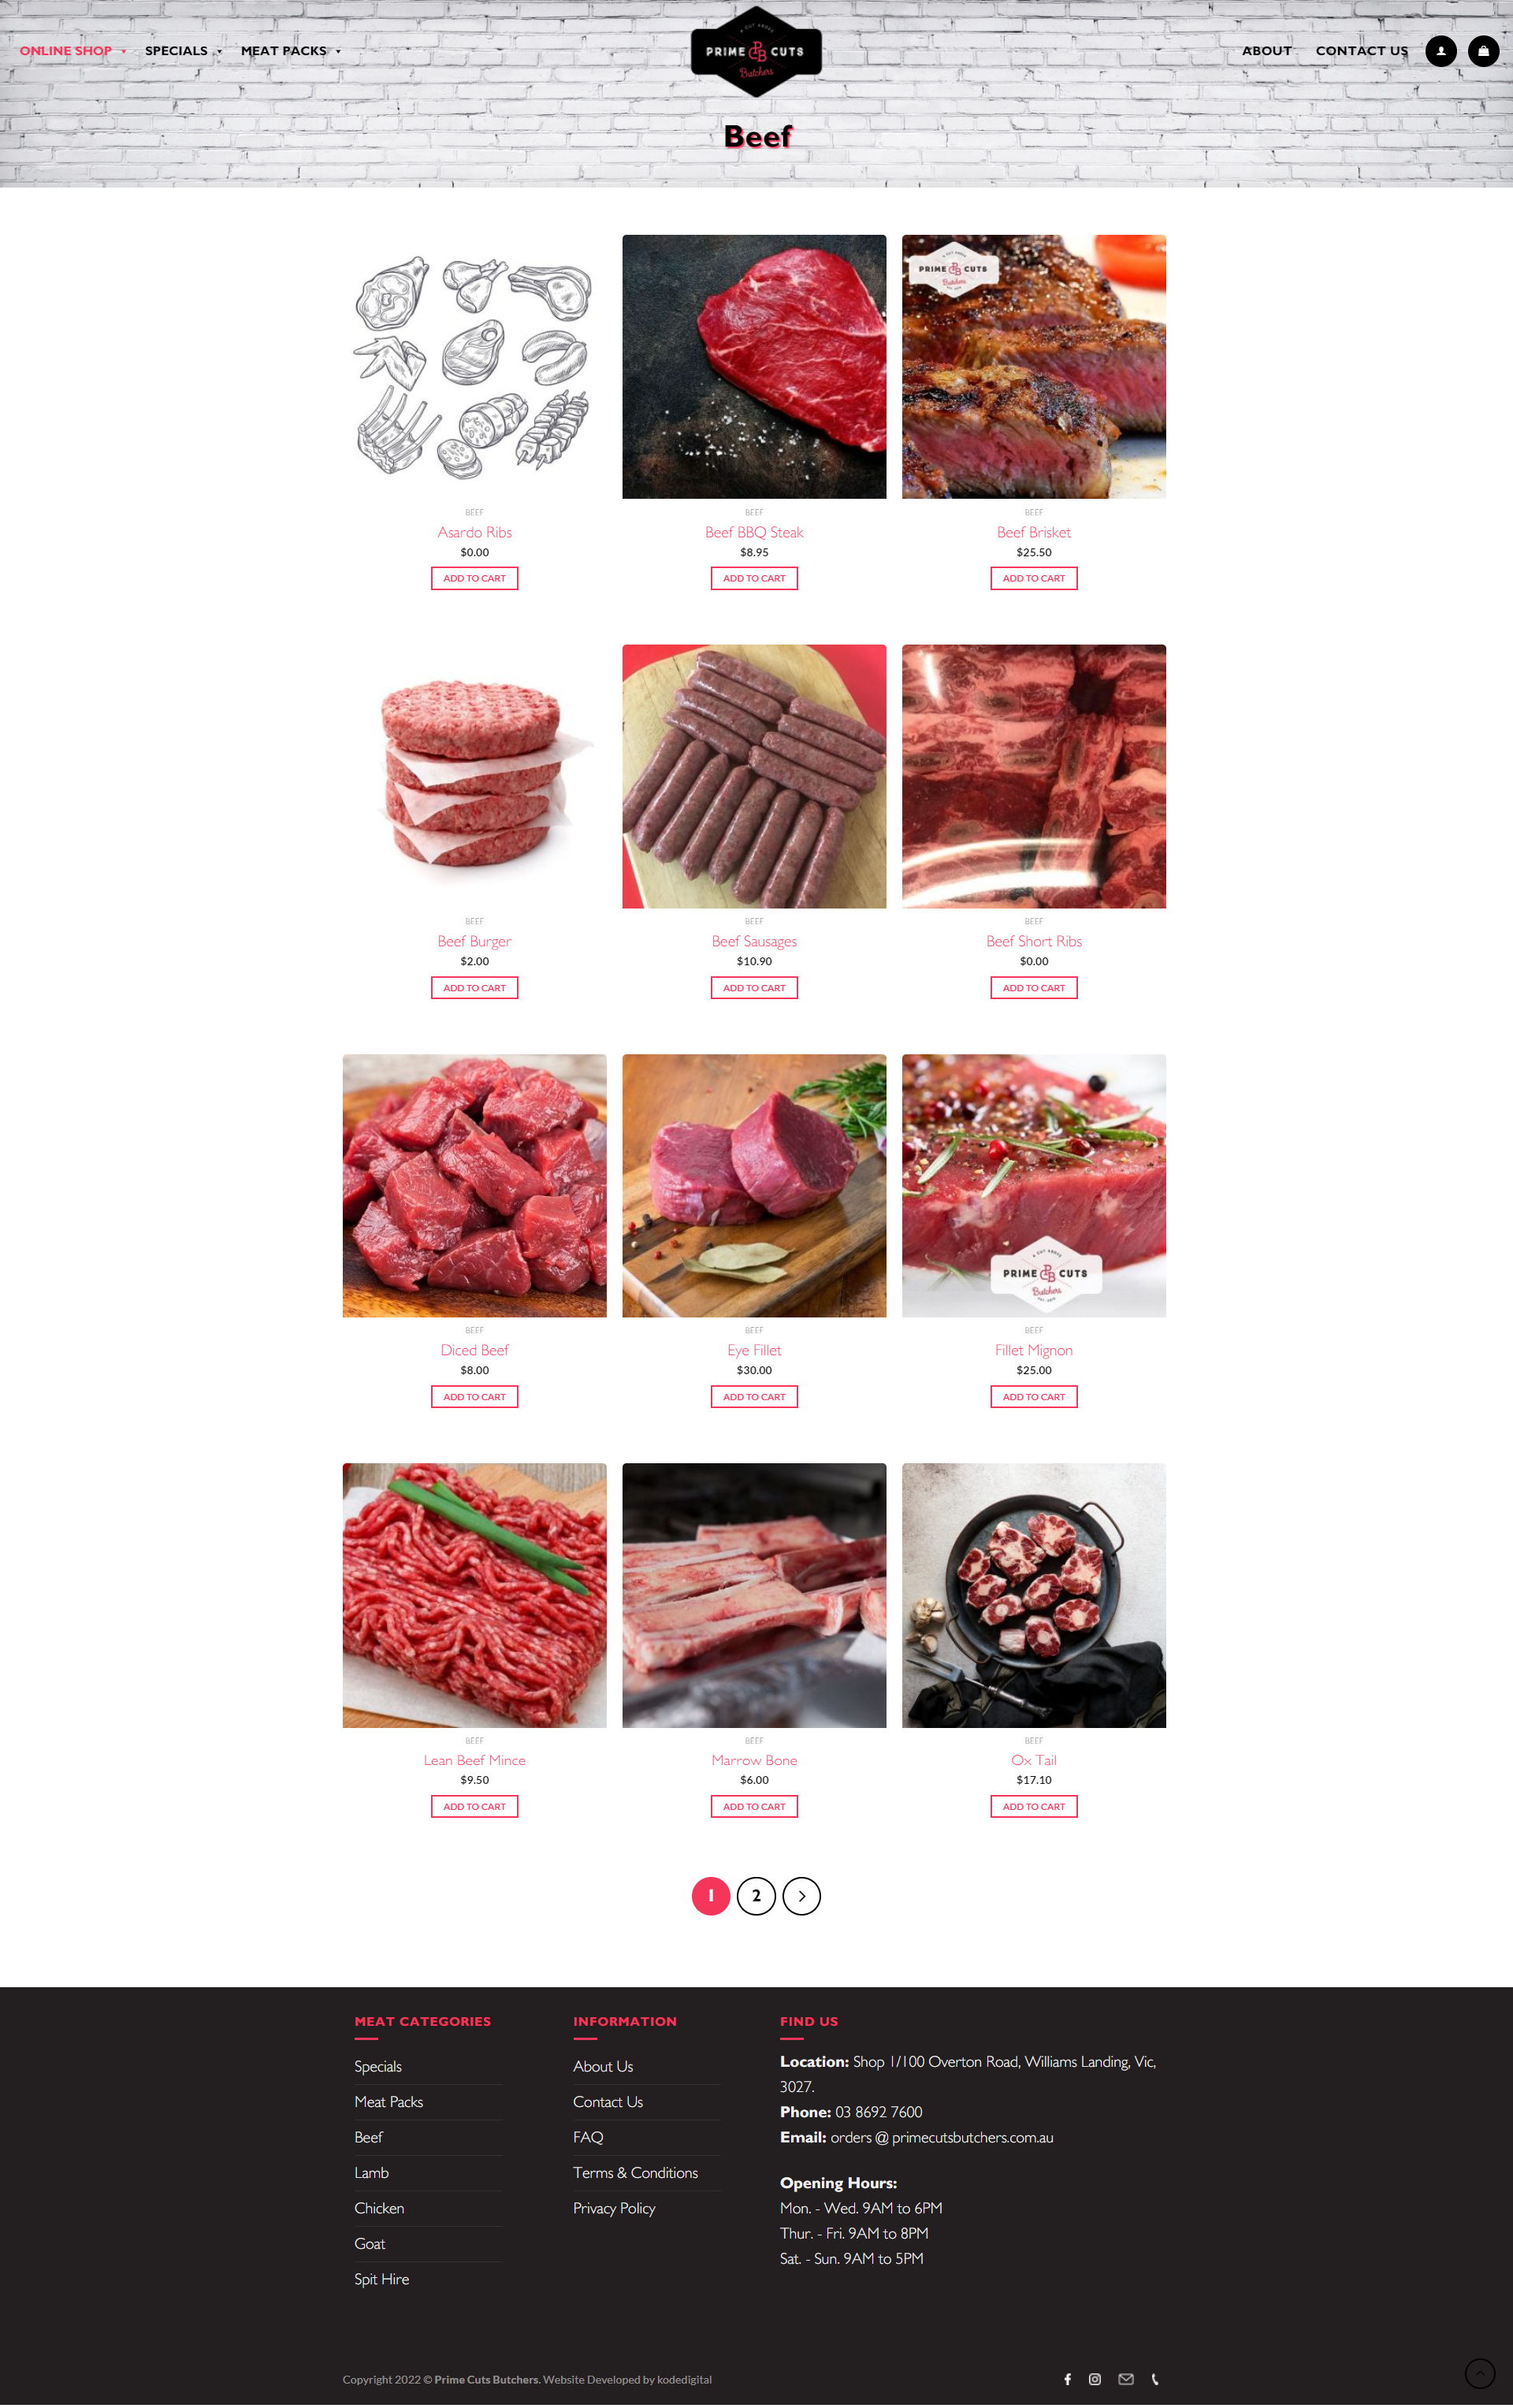 Beef-Archives-Prime-Cuts-Butchers